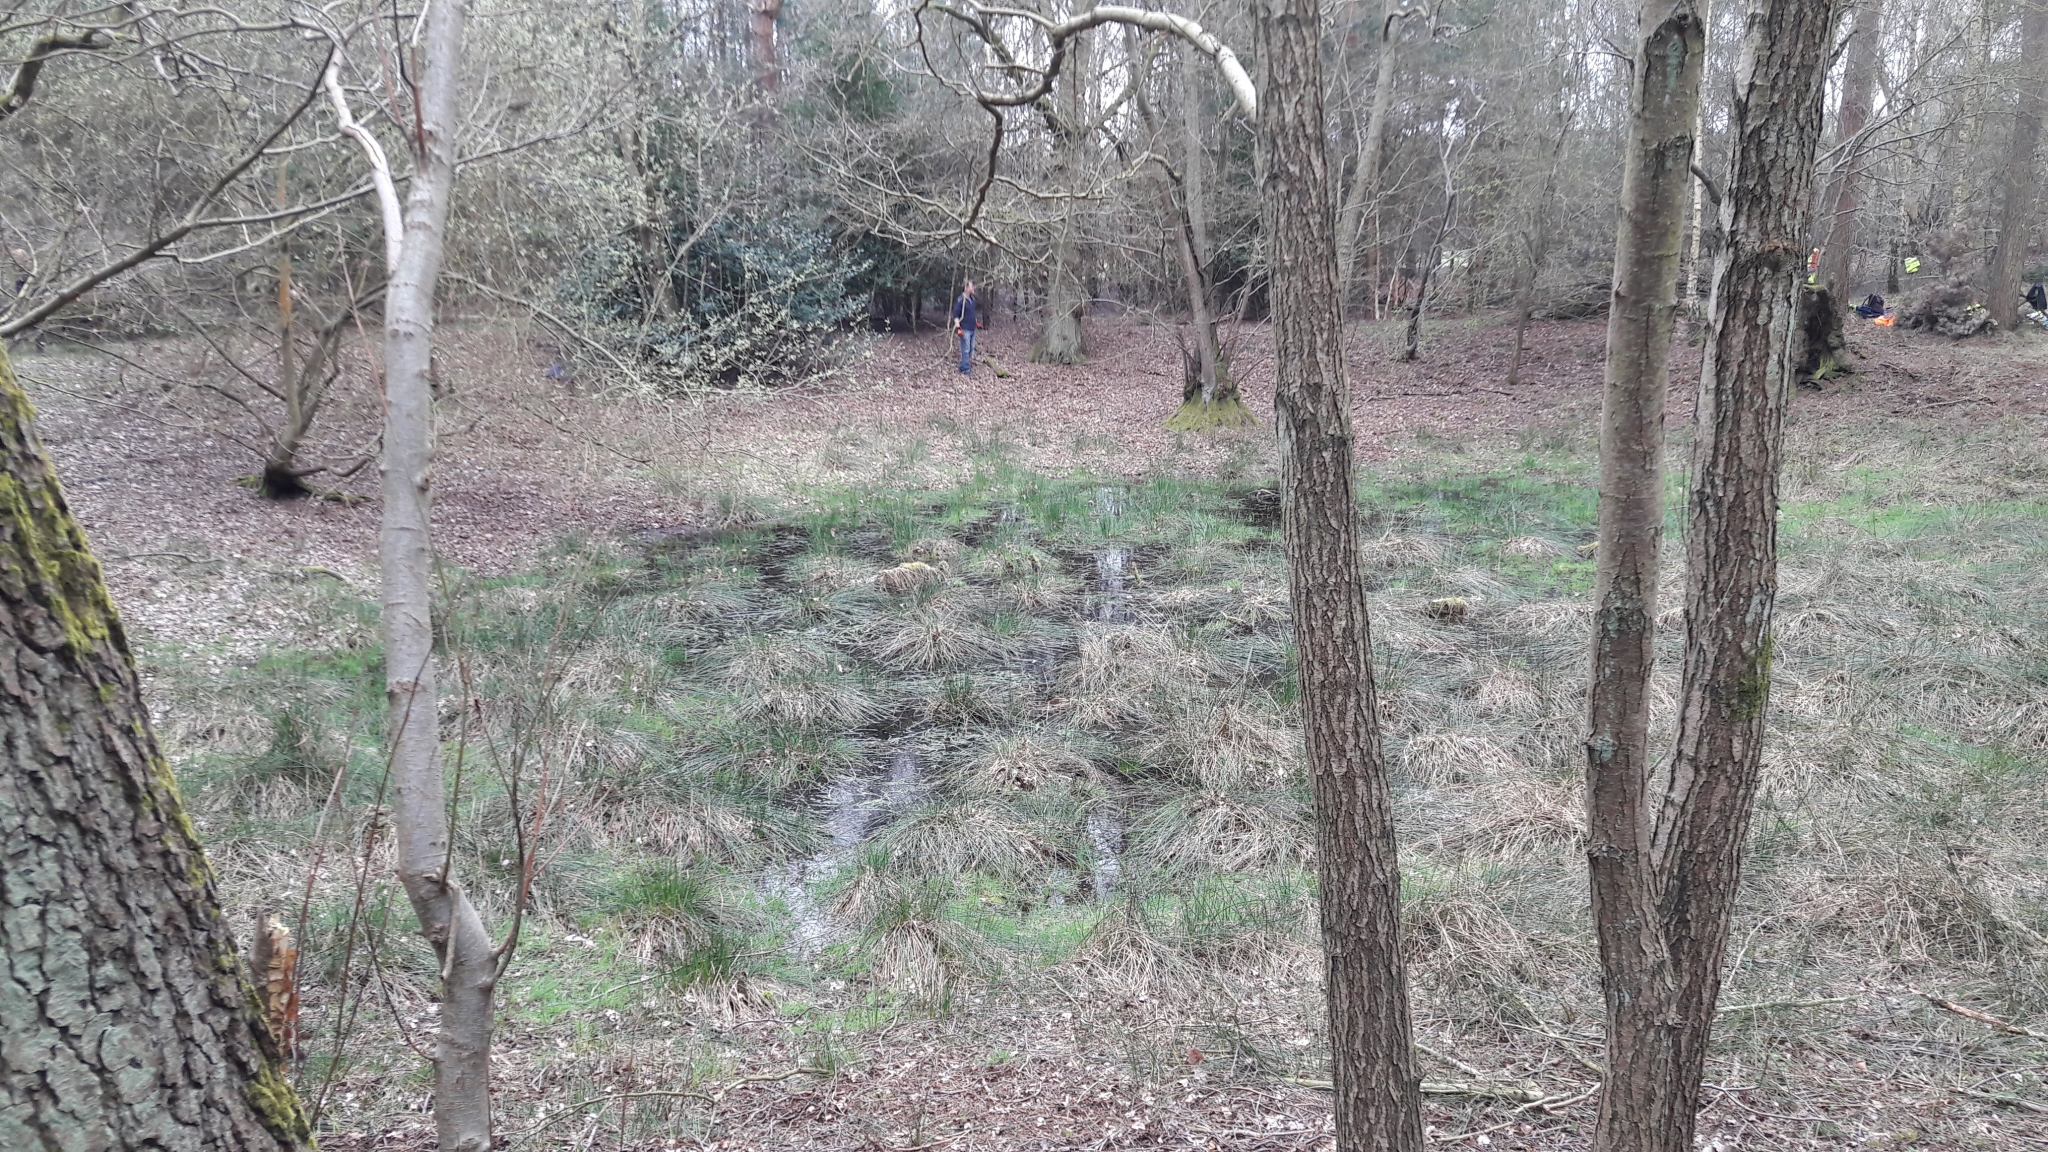 A photo from the FoTF Conservation Event - April 2018 - Improving habitat at High Lodge : A pond amongst the trees